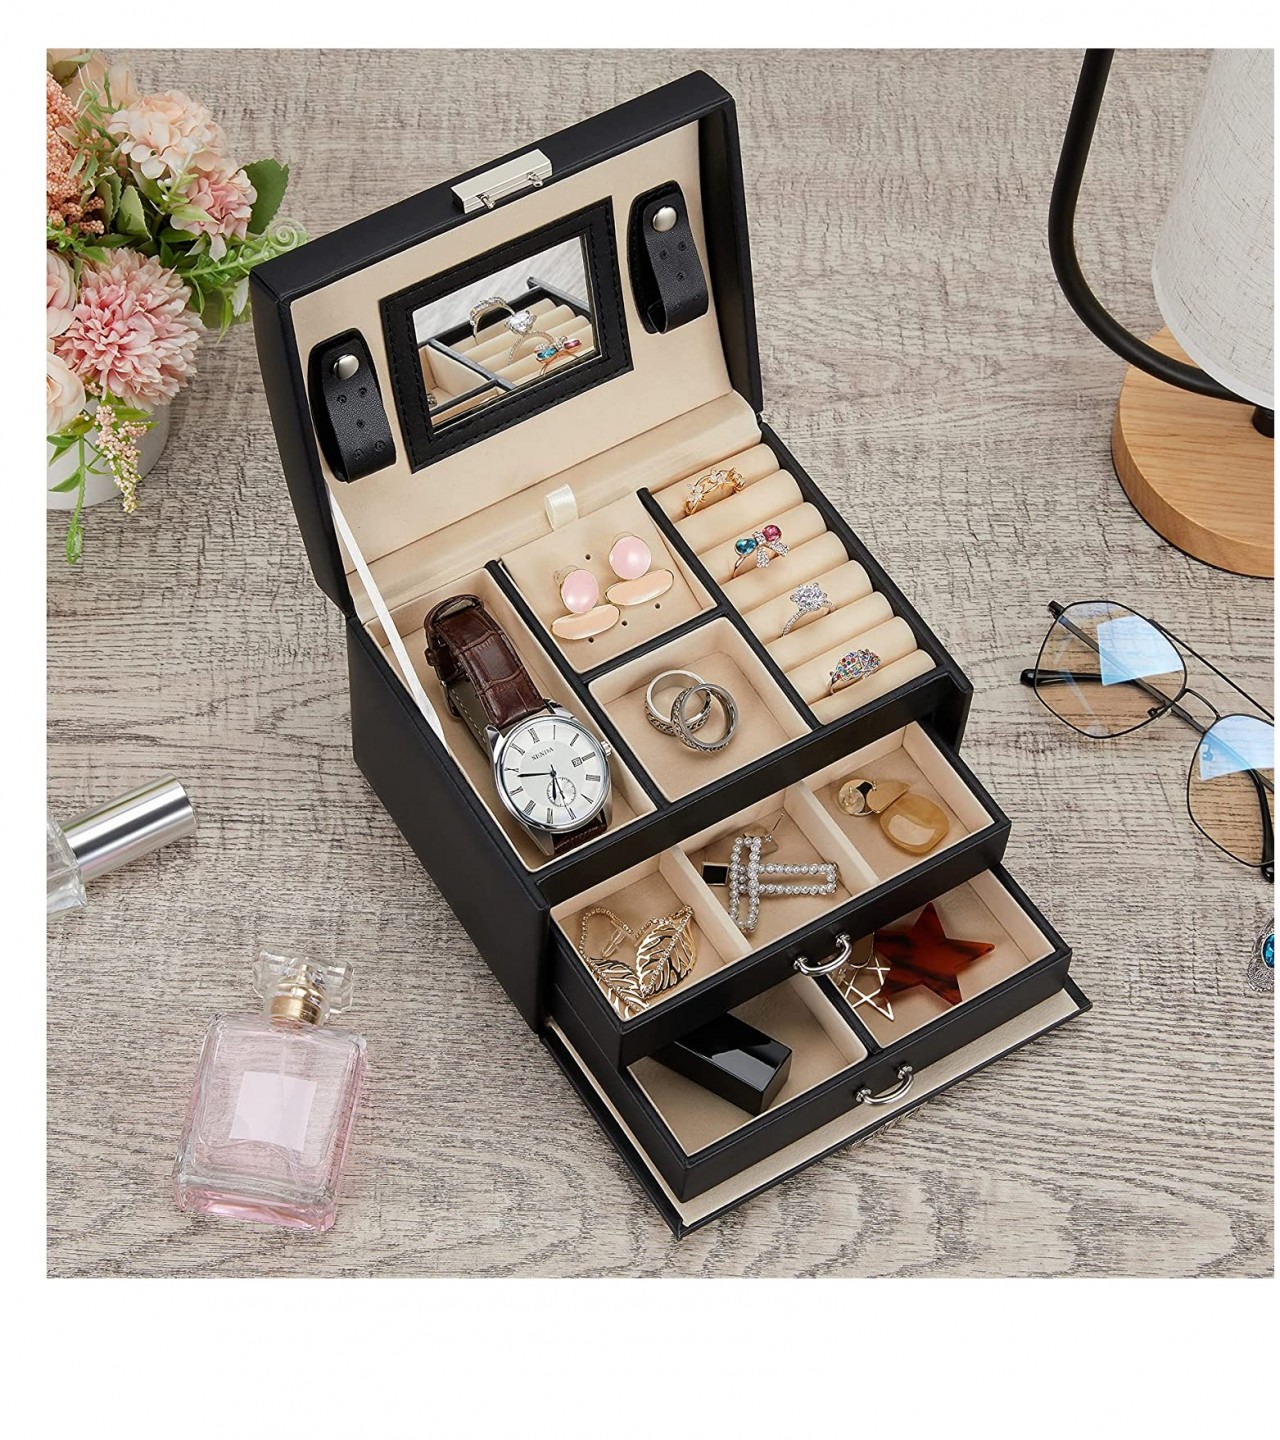 3 Layer Pu Leather Organizer Box With Mirror And Lock Drawer Type Used To Store Jewelry Storage